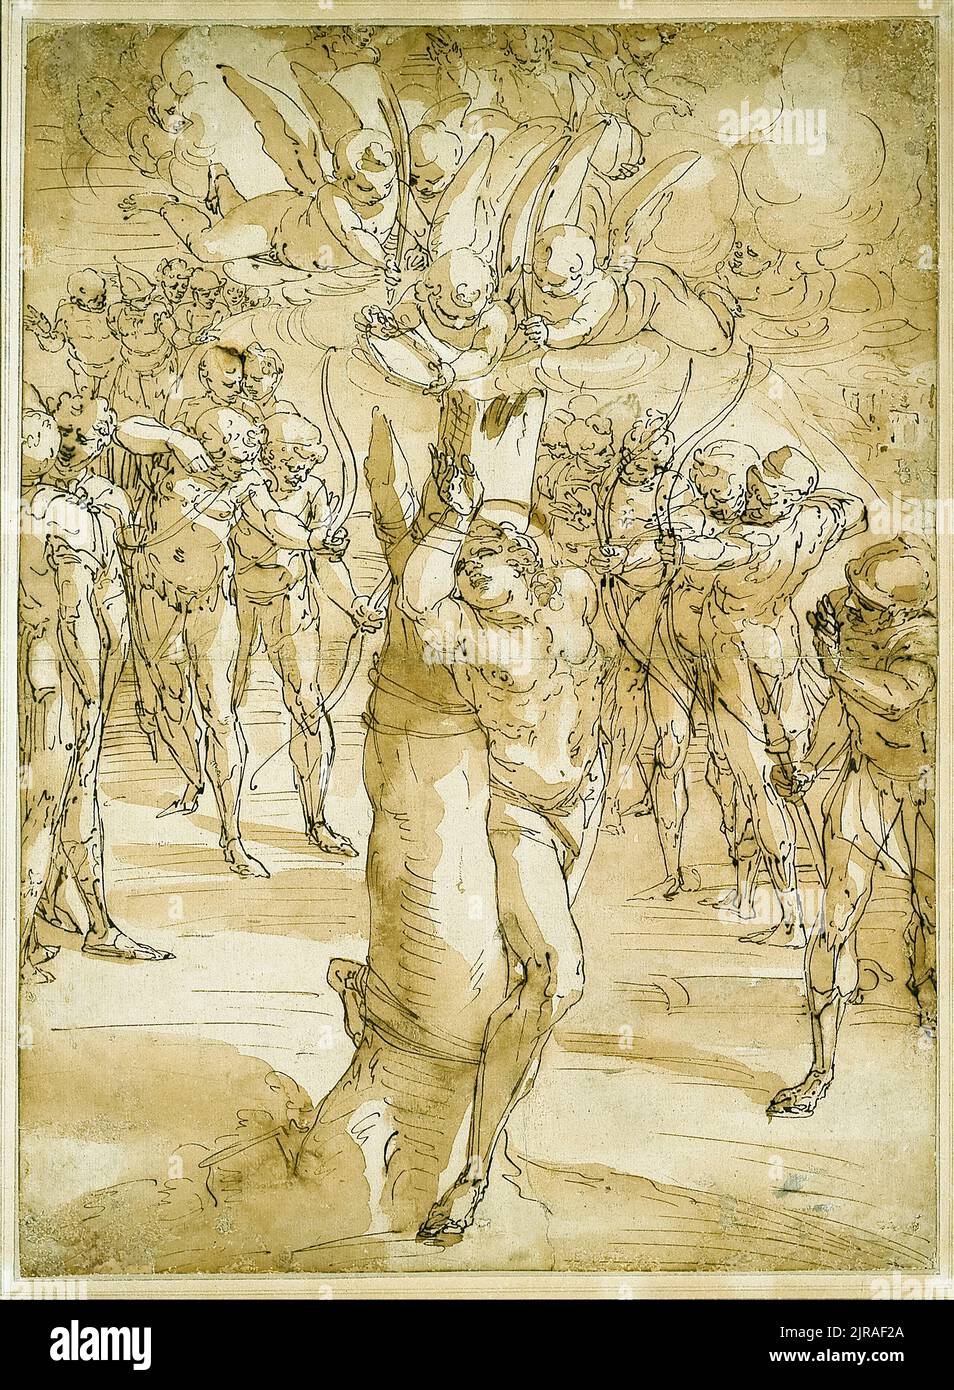 Luca Cambiaso, The Martyrdom of Saint Sebastian, drawing in pen and ink, 1561-1563 Stock Photo